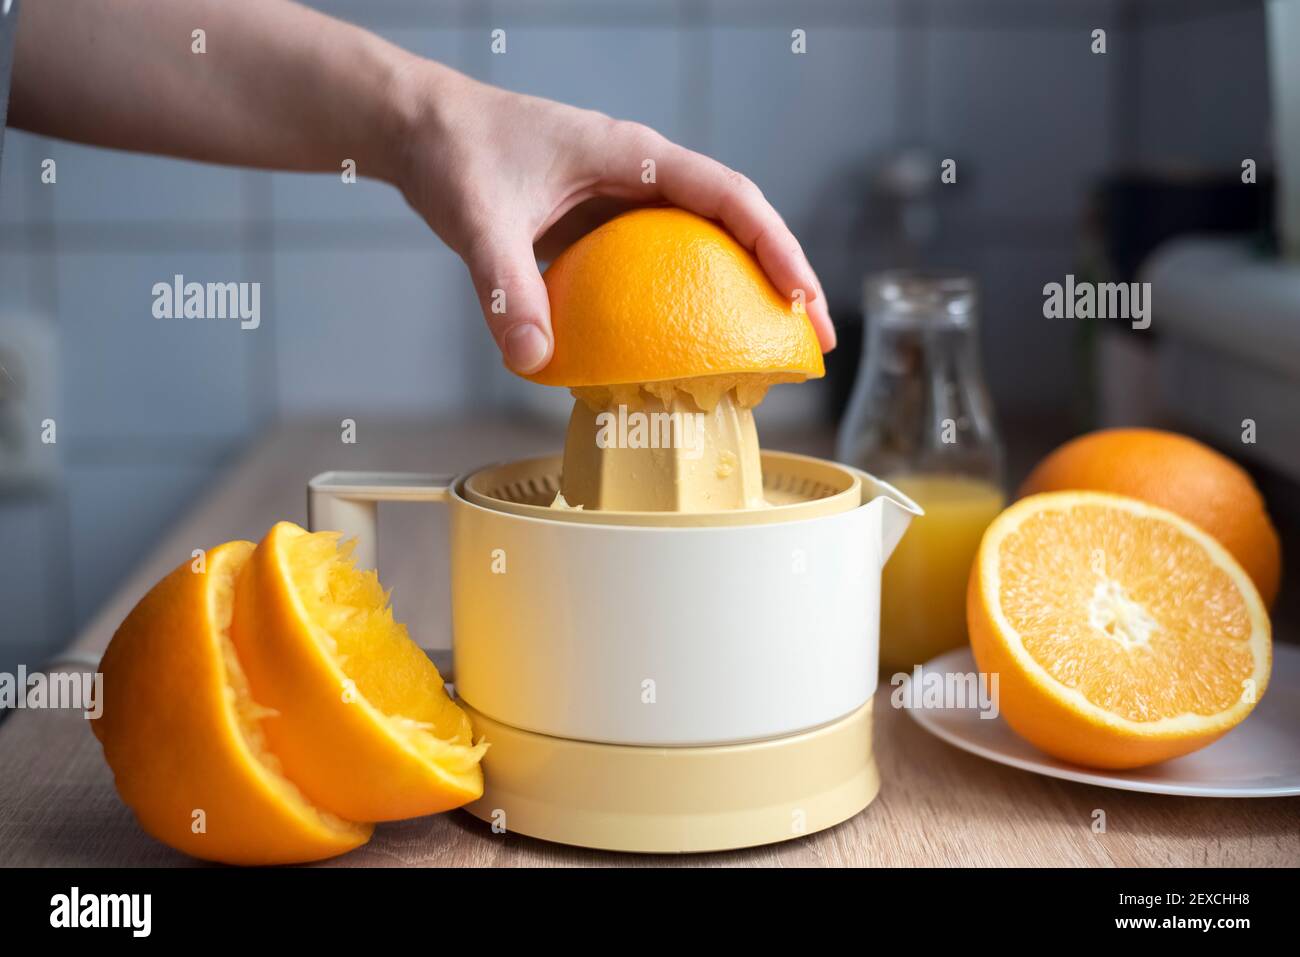 https://c8.alamy.com/comp/2EXCHH8/female-hand-squeezing-orange-juice-from-fresh-oranges-with-a-juicer-in-the-home-kitchen-lose-up-2EXCHH8.jpg